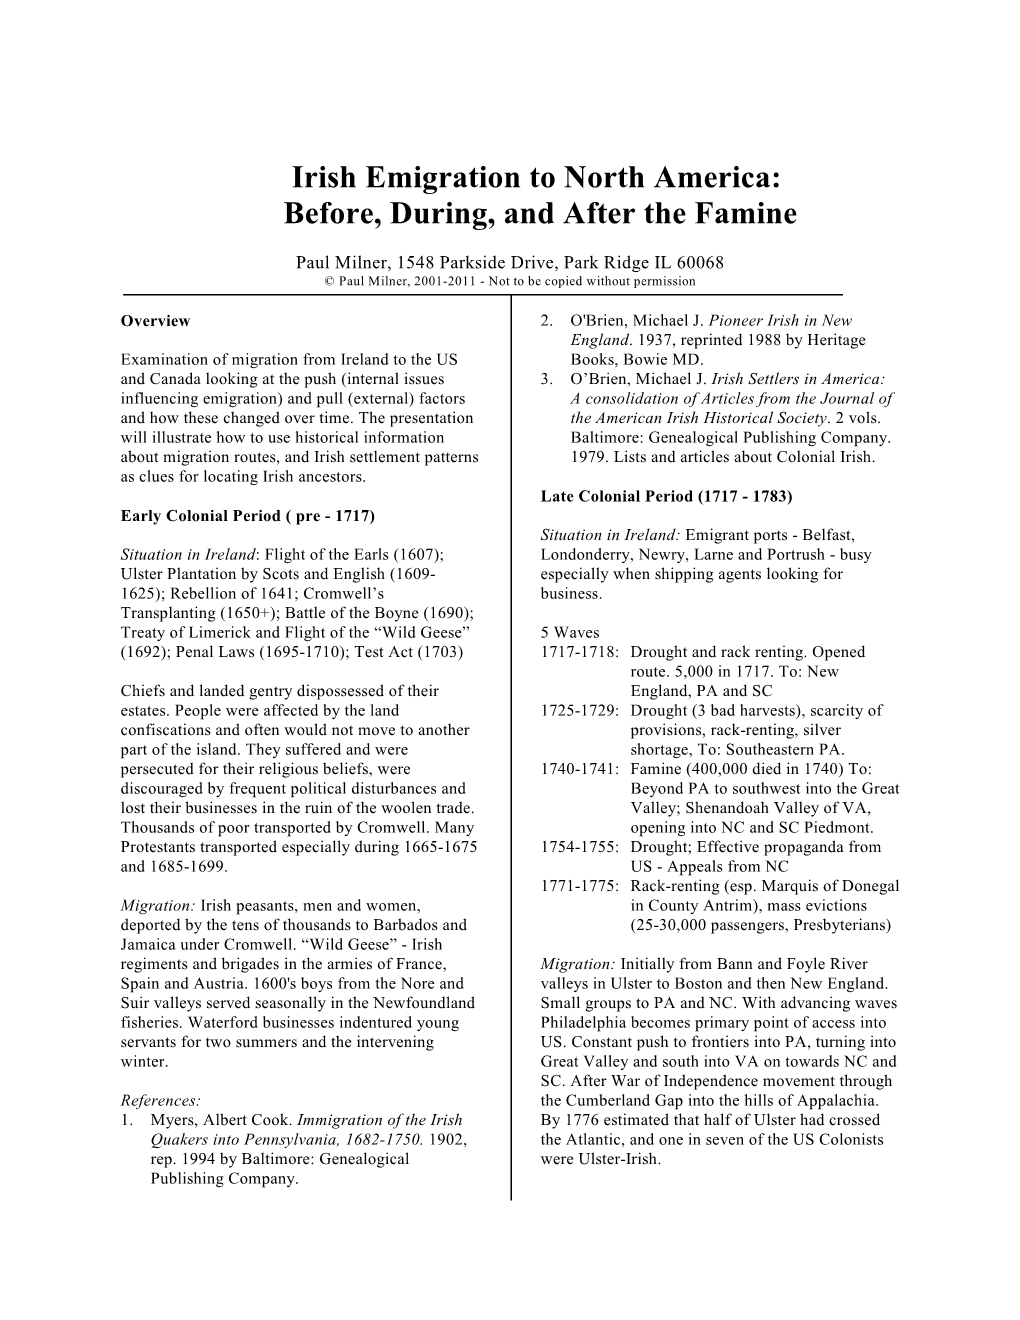 Irish Emigration to North America: Before, During, and After the Famine